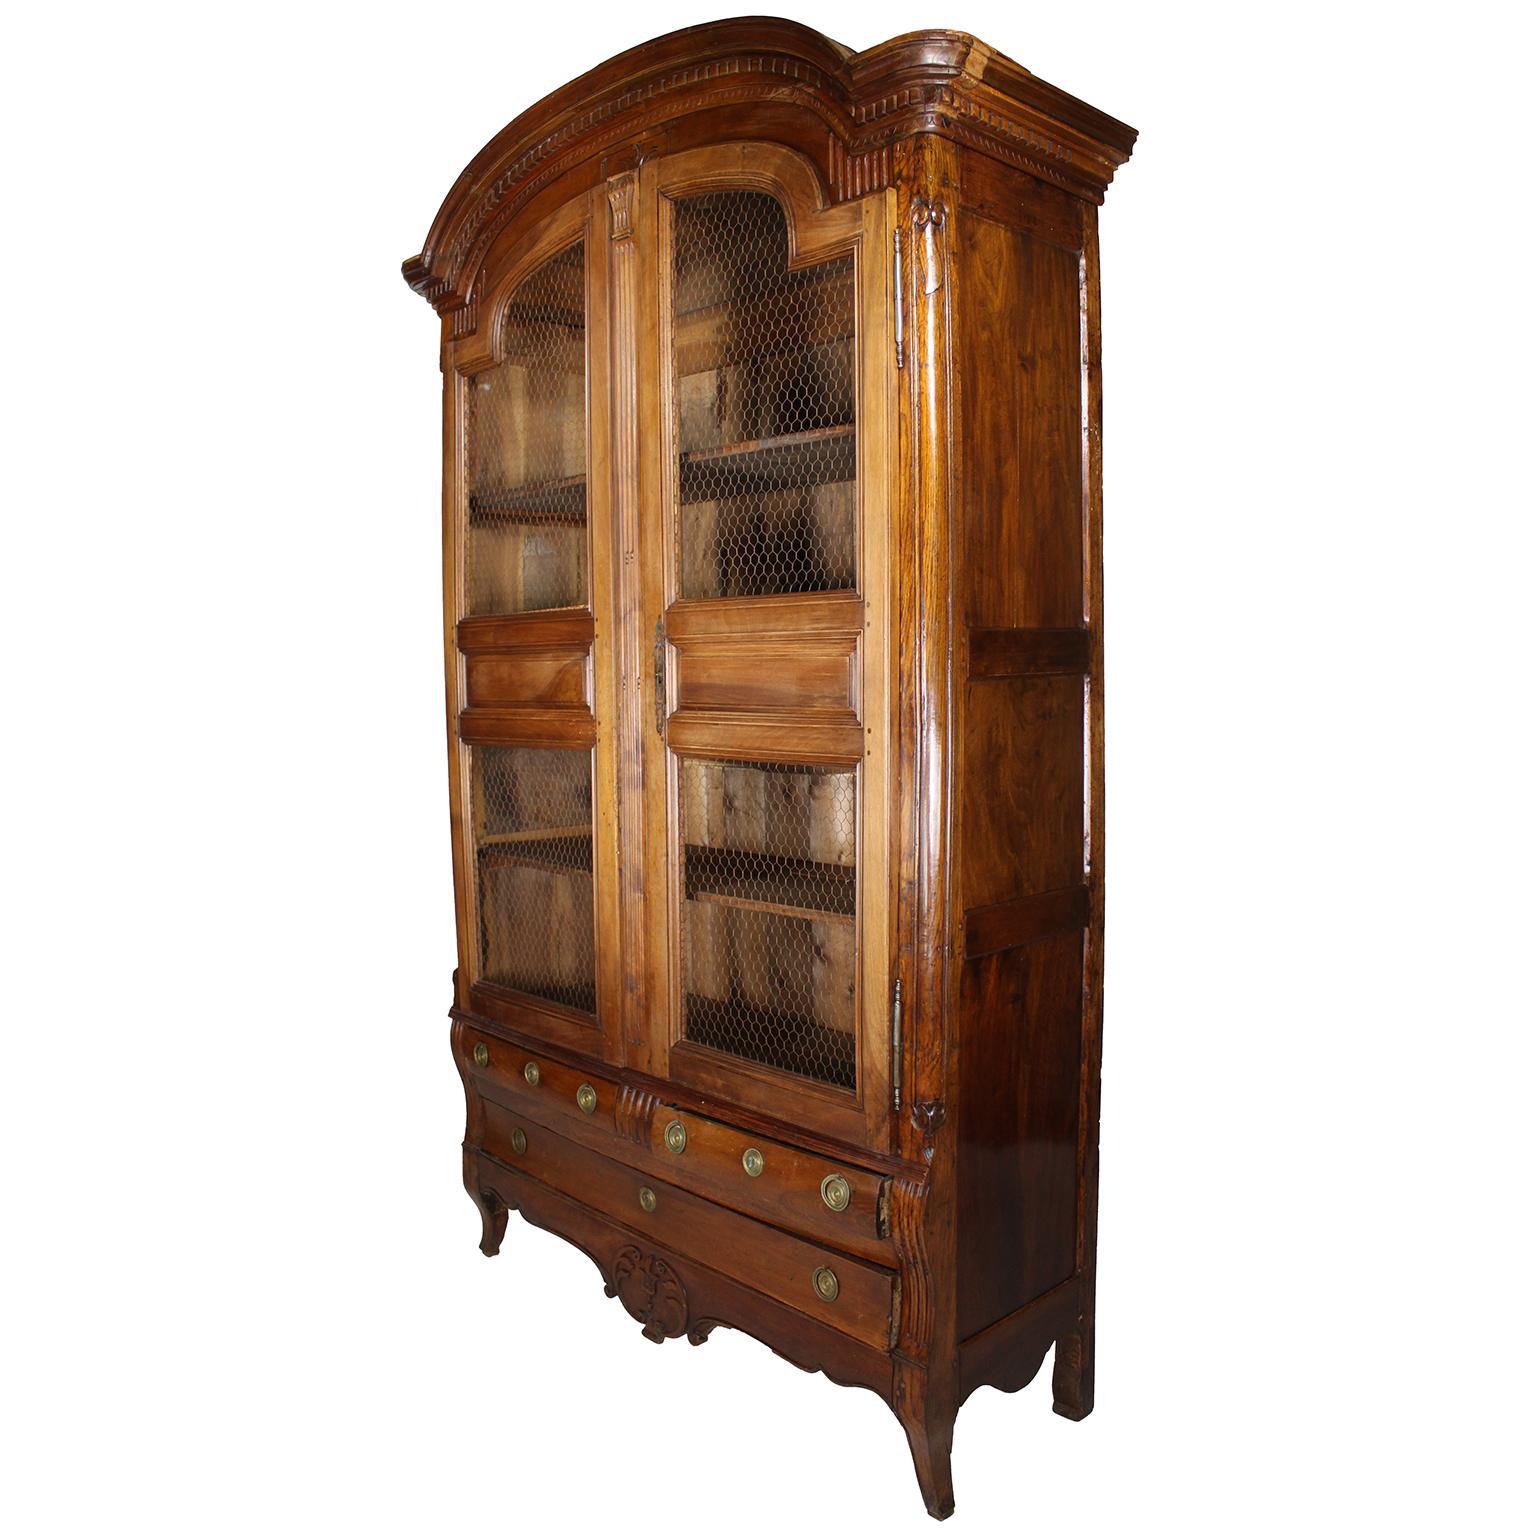 A Tall French 18th-19th Century Louis XV Style Provincial - Country French Carved Walnut Armoire - Bibliotheque - Bookcase. The twin-door vitrine or book cabinet with three wooden shelves and chicken-wire protective doors, above a pair of side by